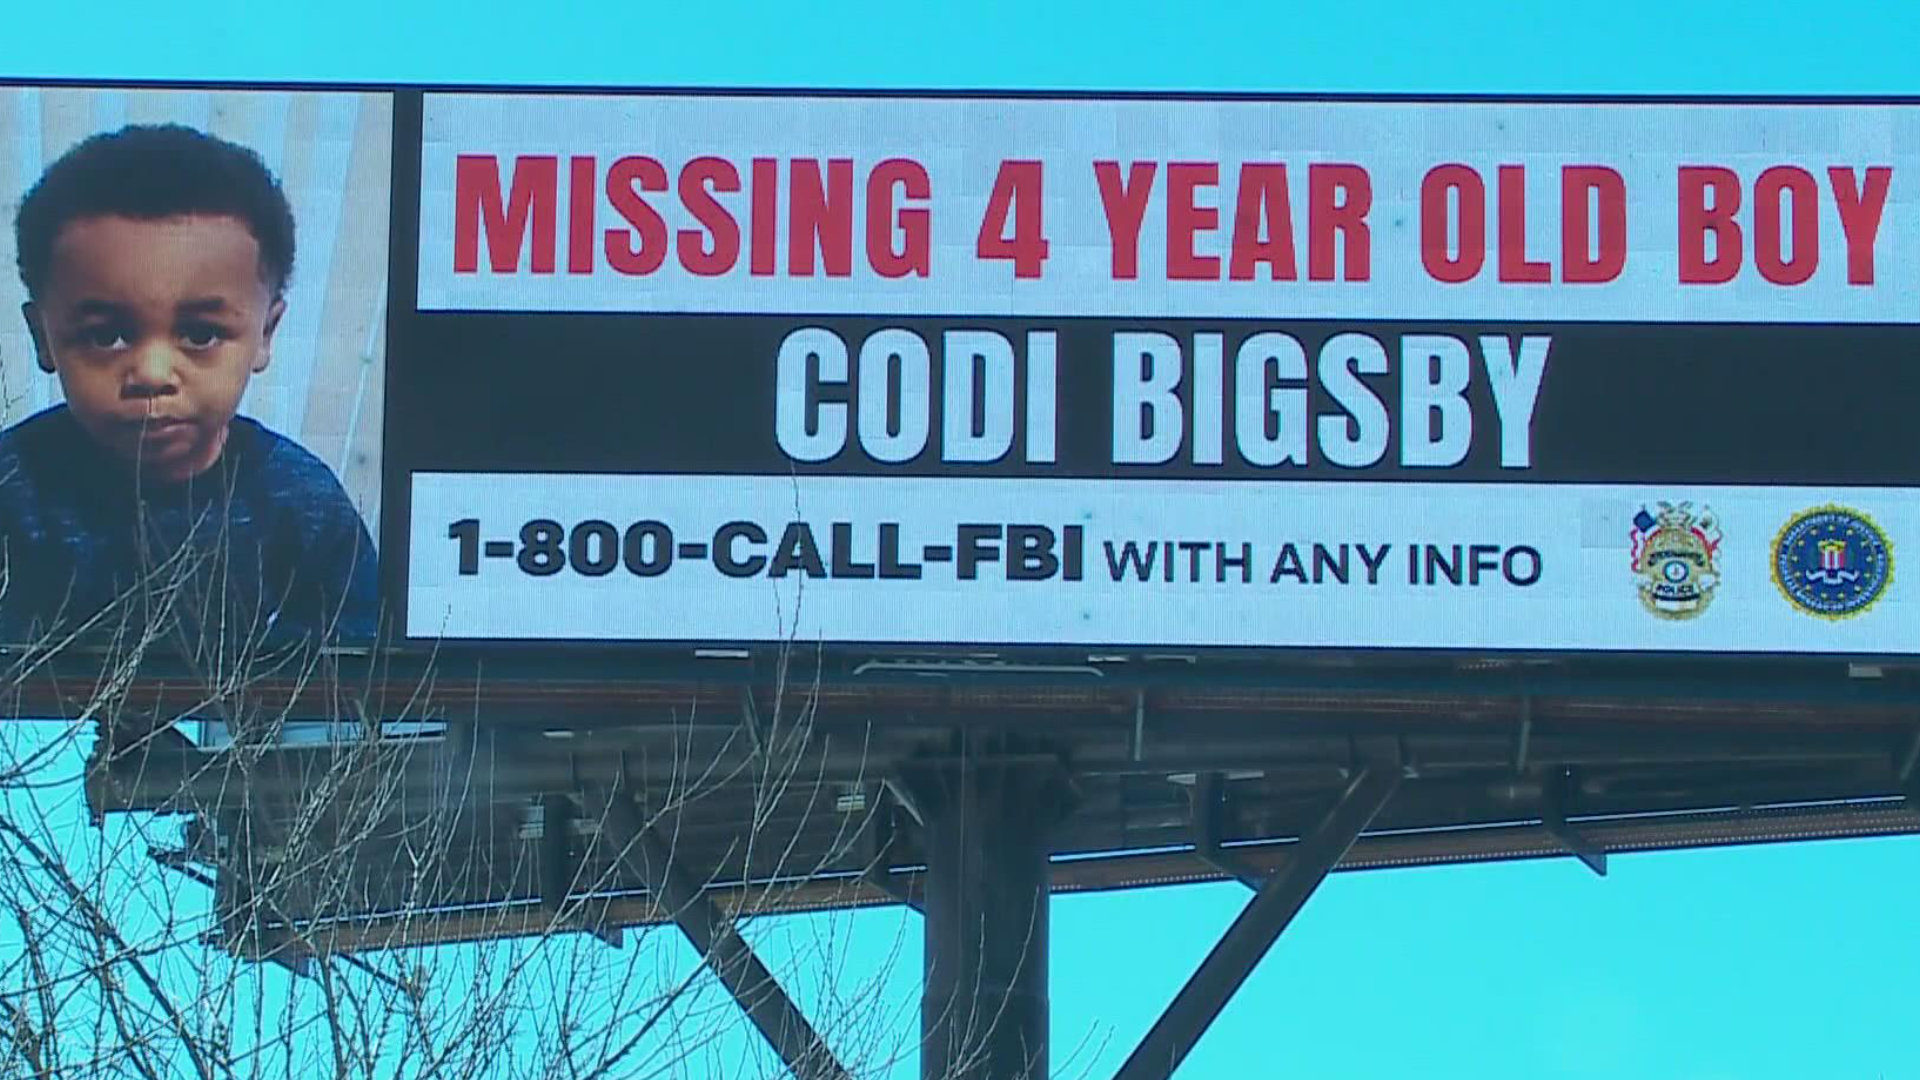 There are signs, a billboard, flyers, and small search parties dedicated to figuring out what happened to Codi.